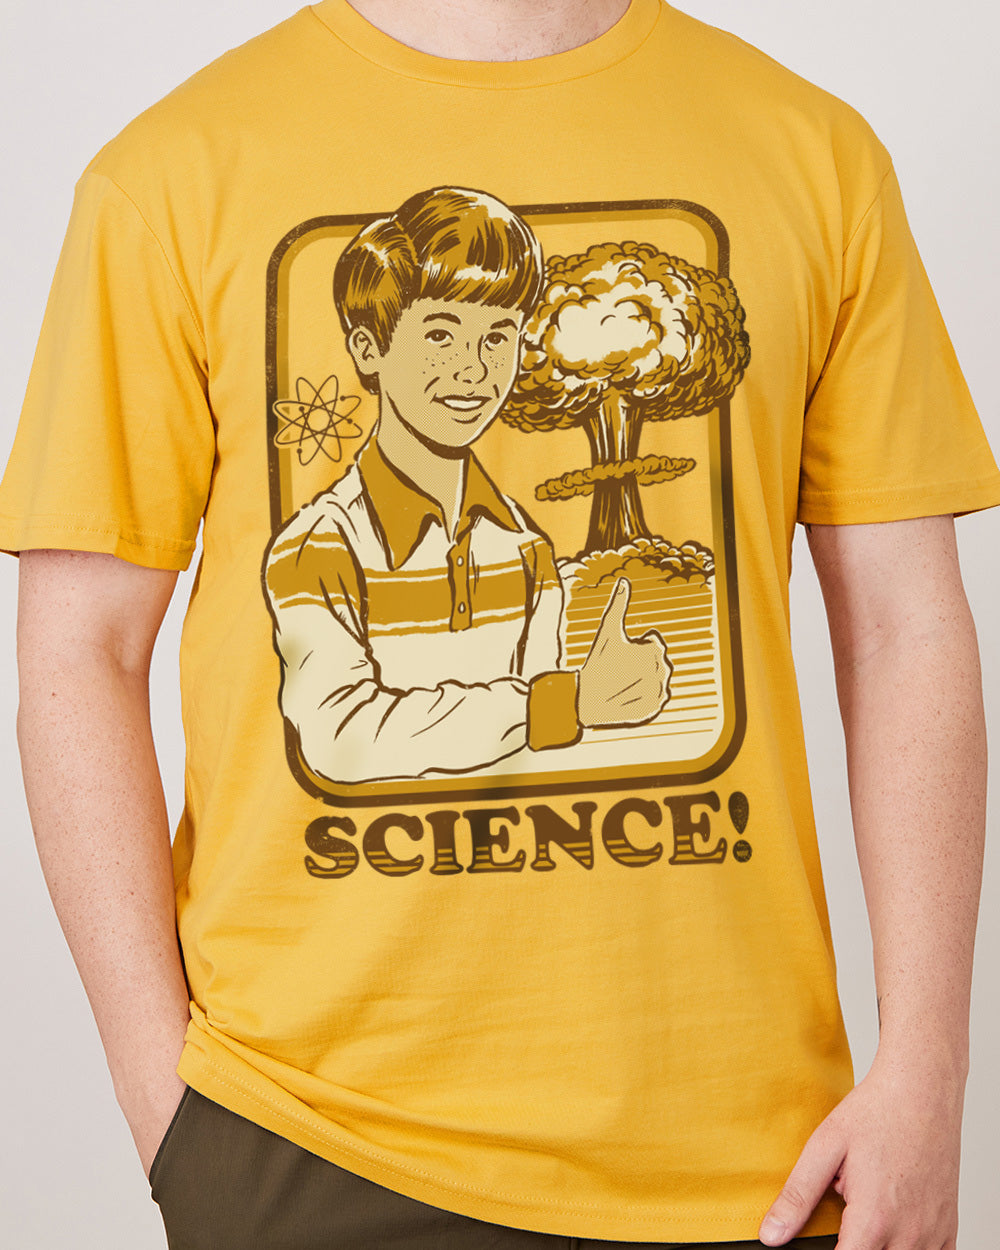 Science! T-Shirt